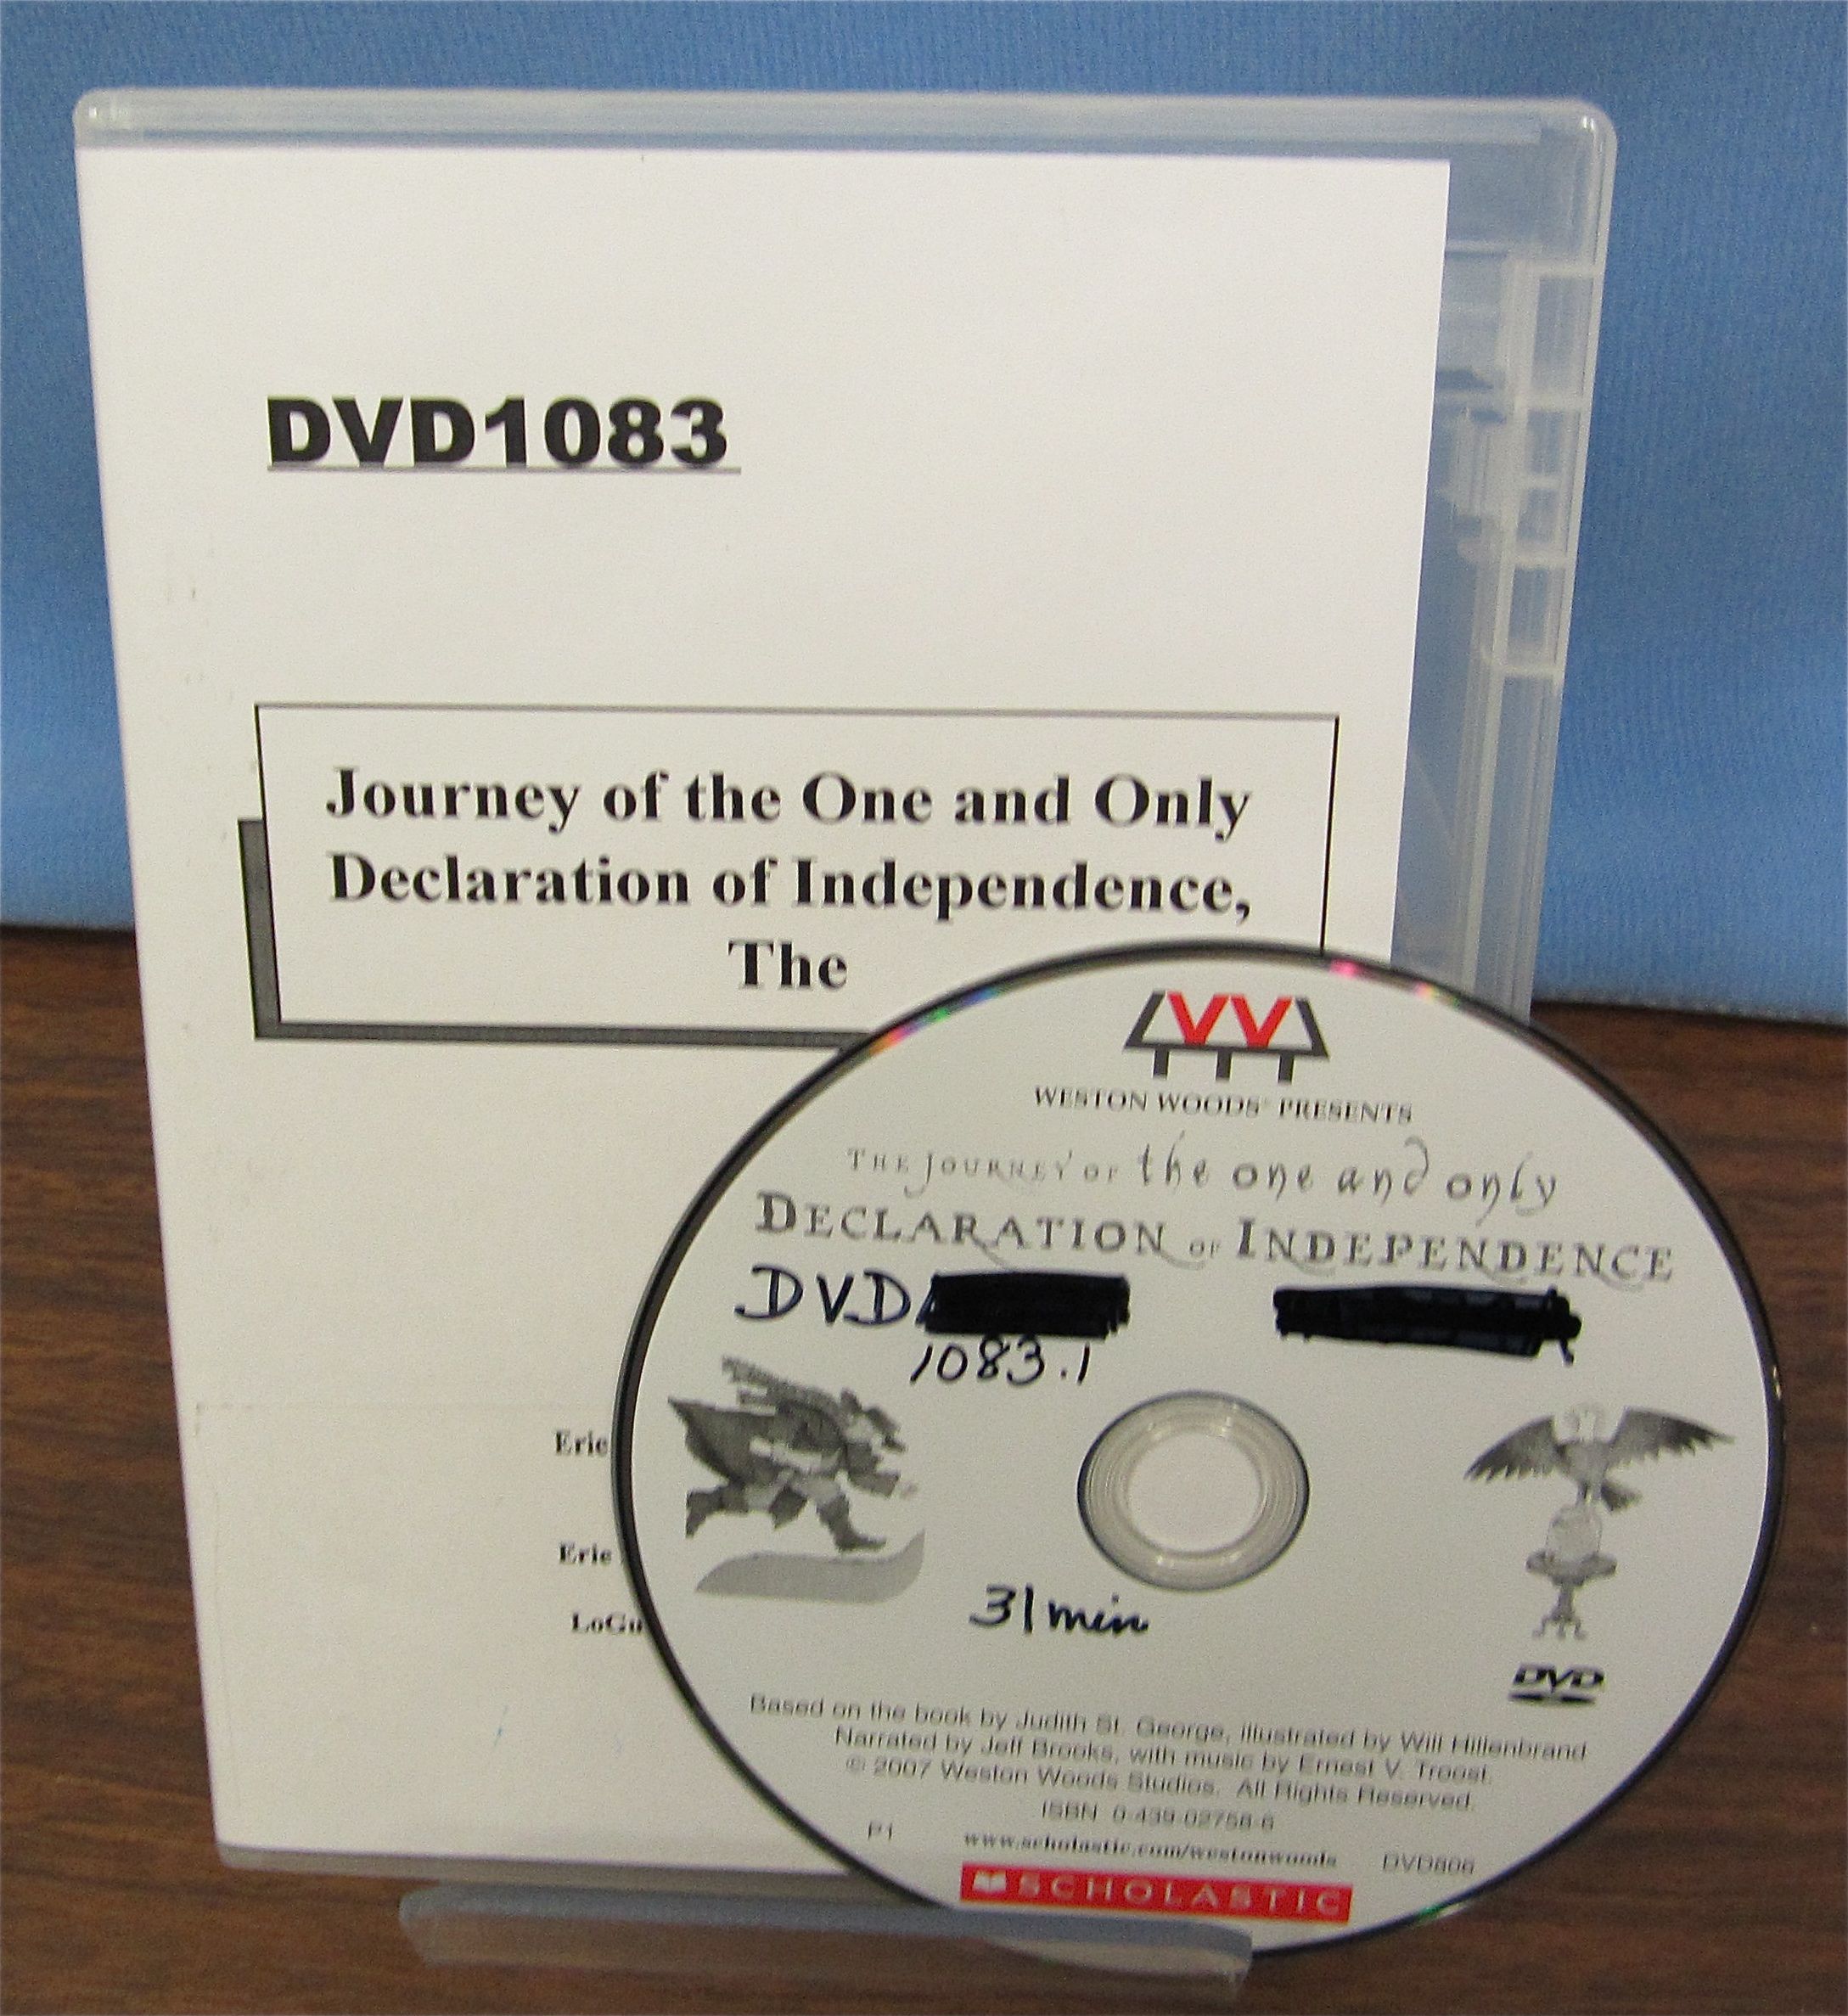 Journey of the One and Only Declaration of Independence, The